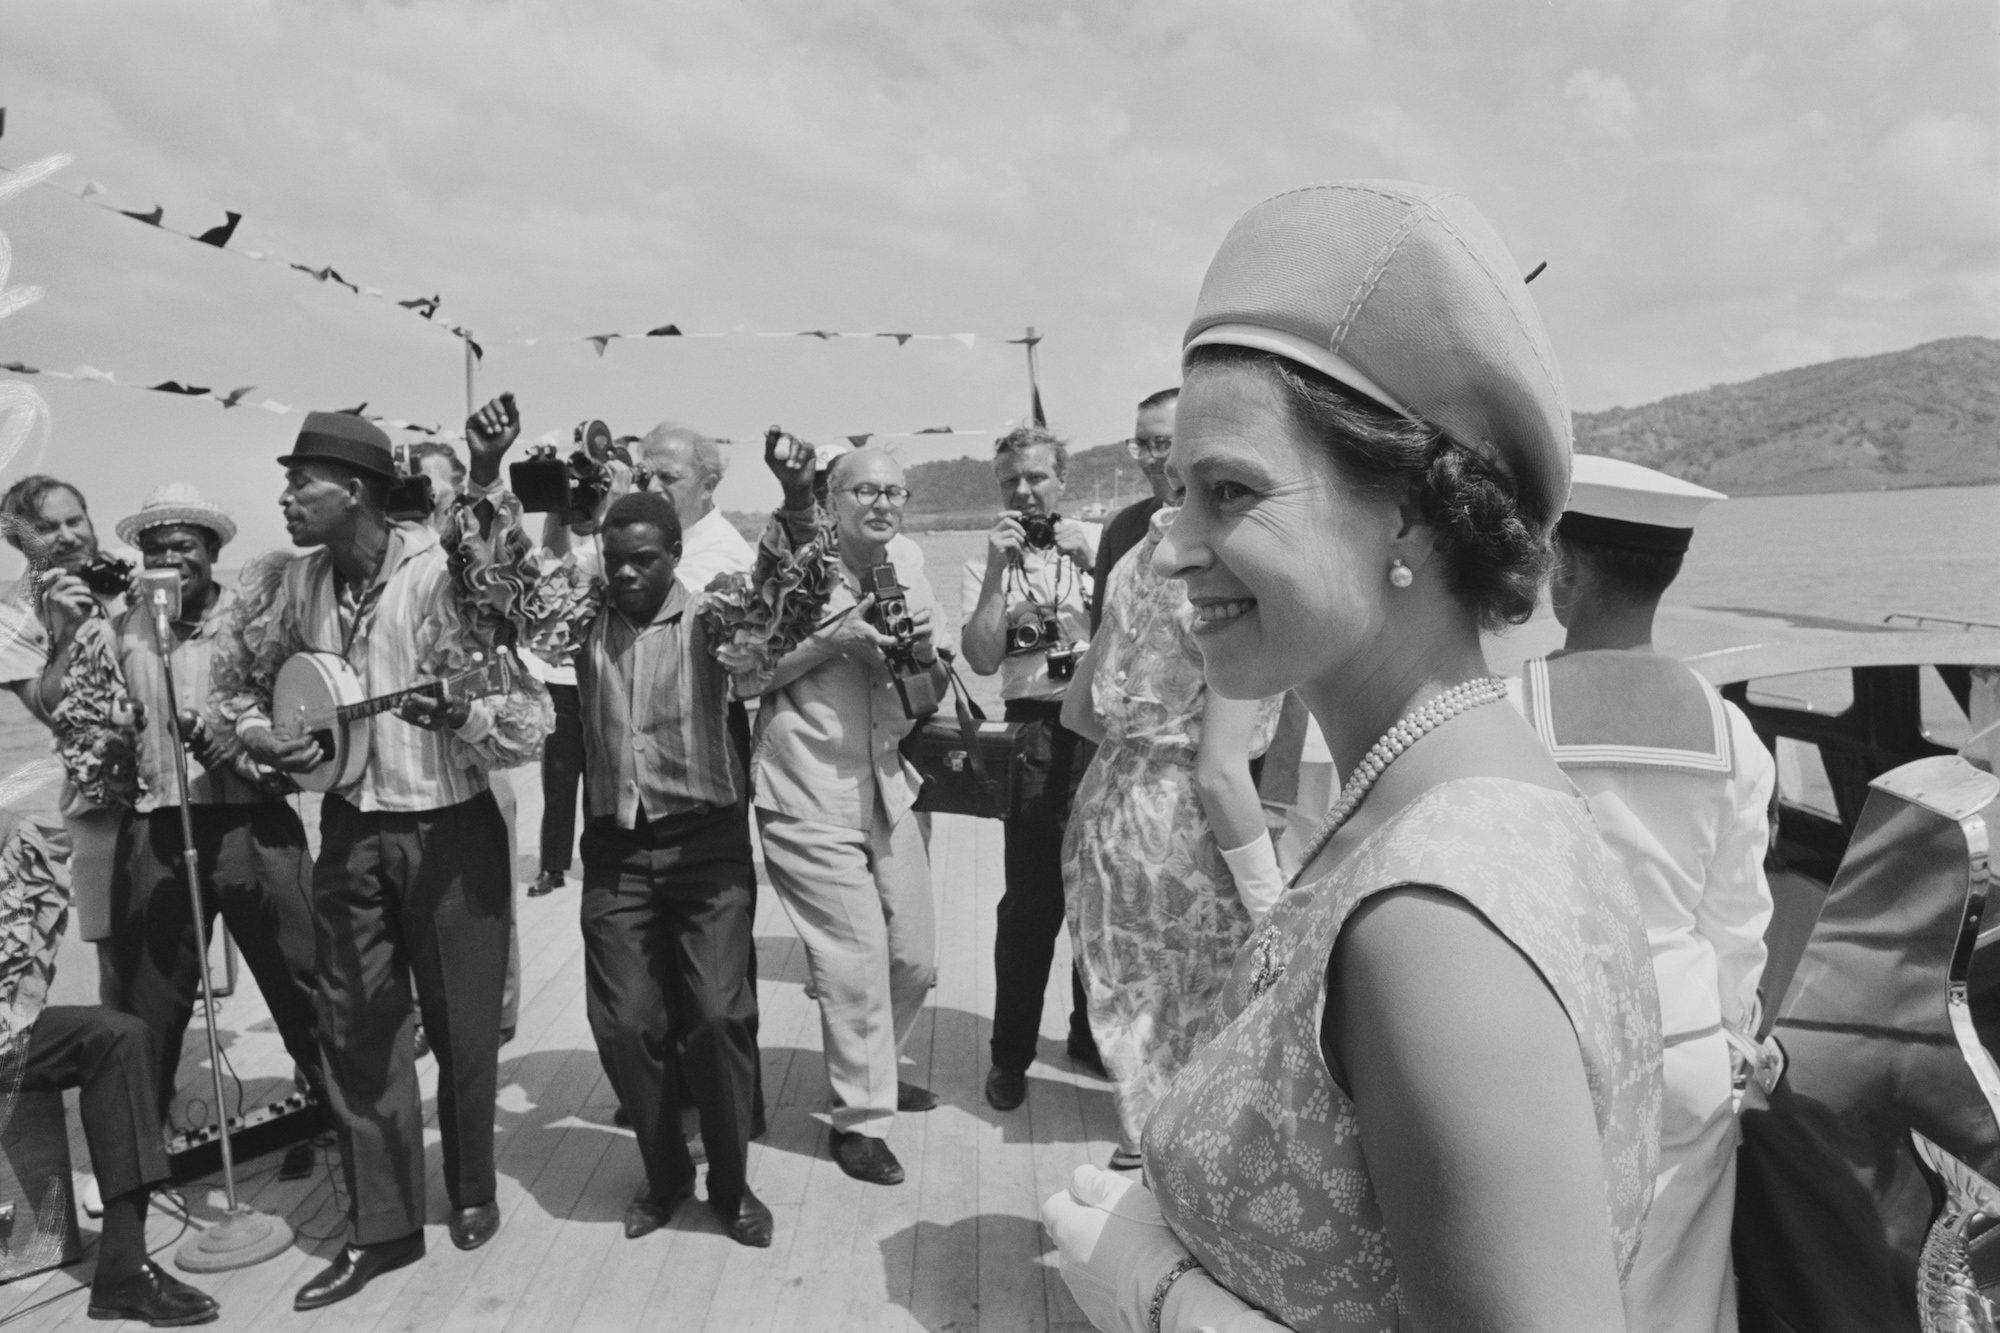 Queen Elizabeth II during a Commonwealth visit to the Caribbean